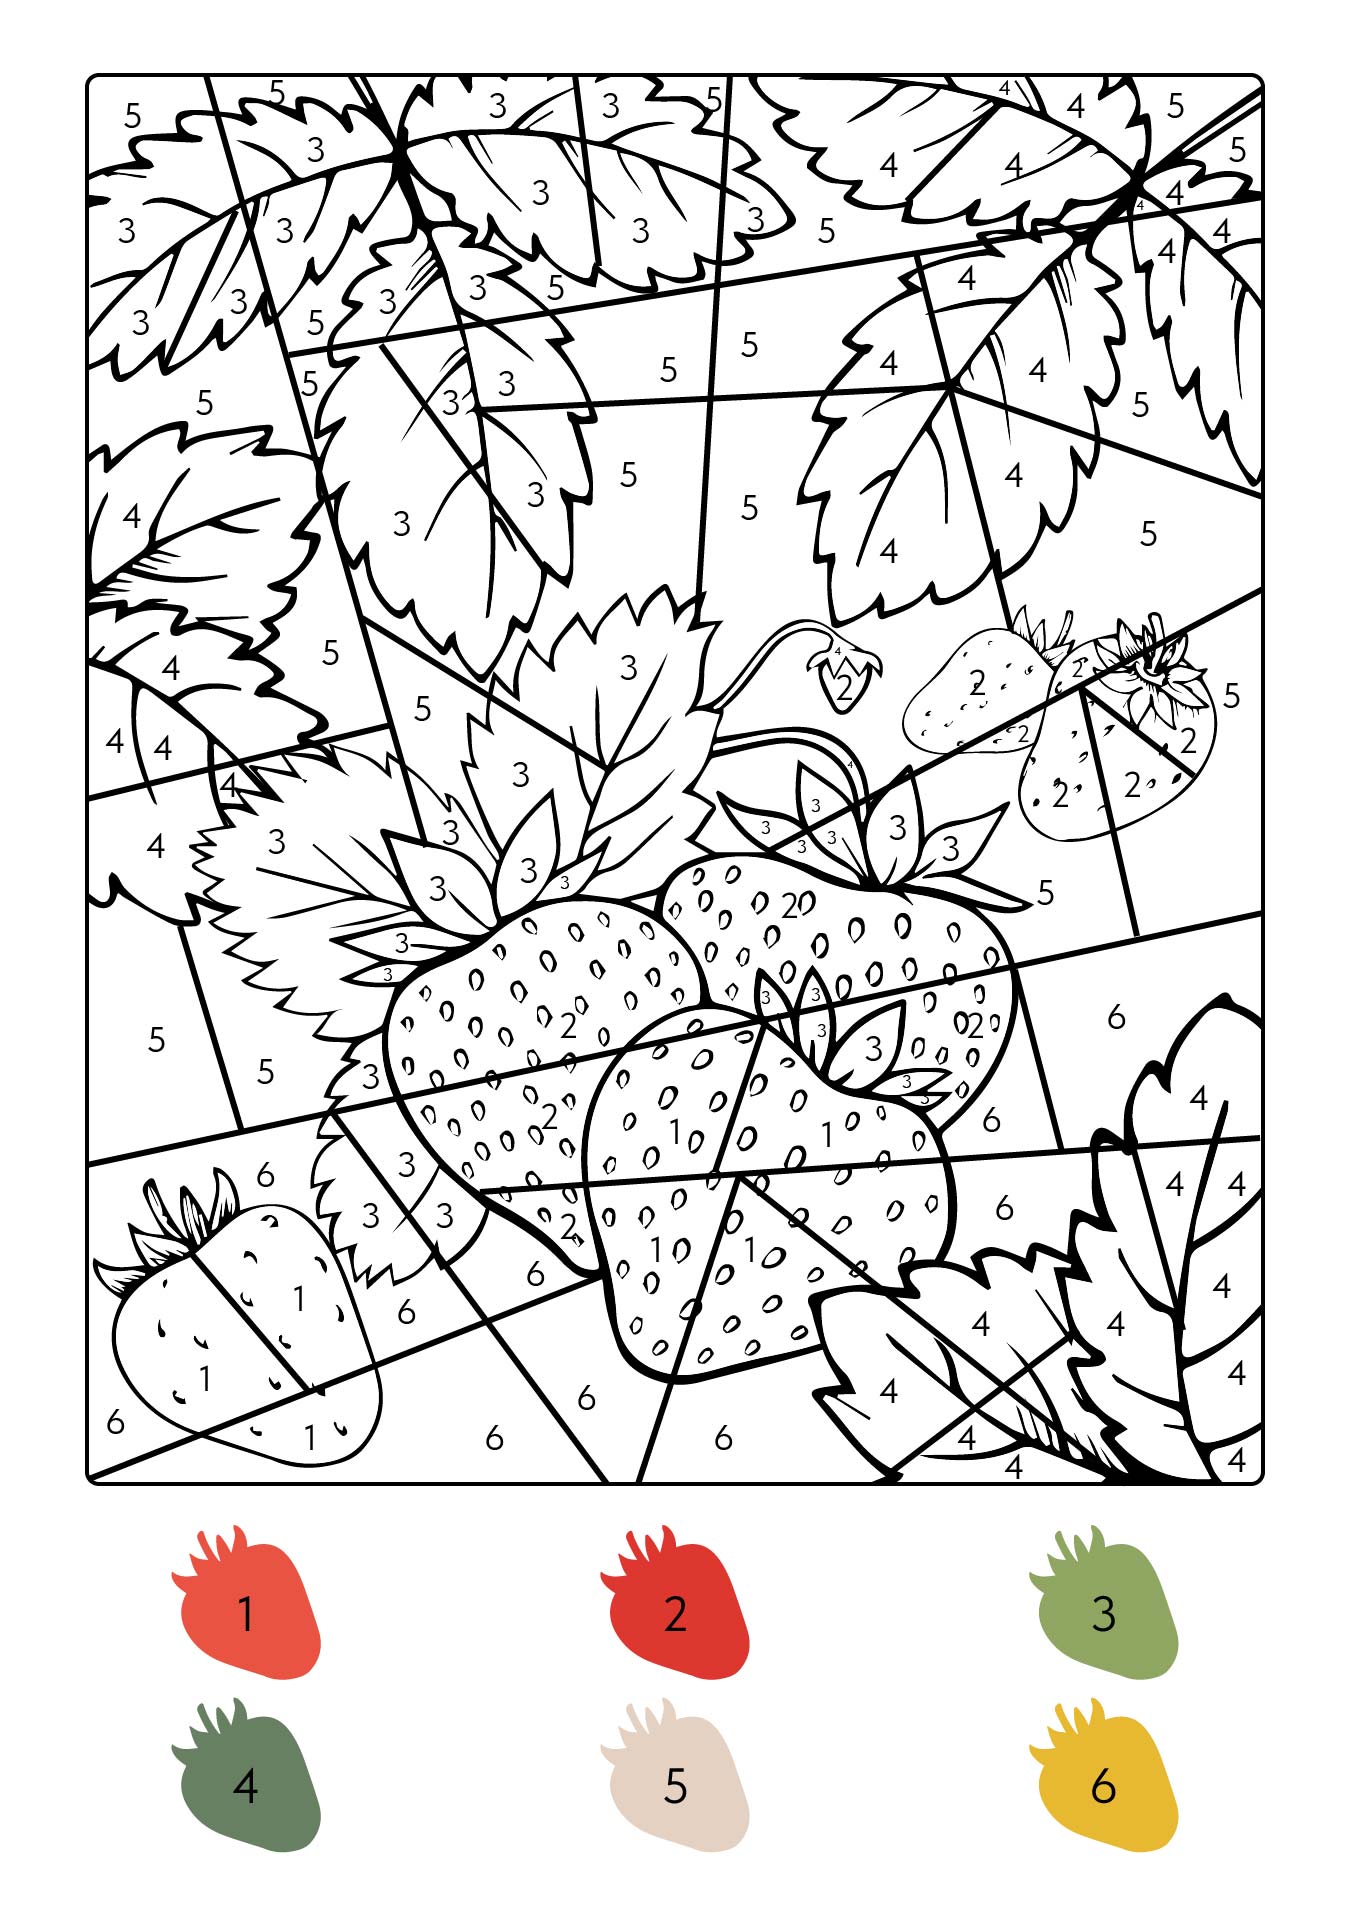 Hard Strawberry Garden Color By Number Coloring Page Printable